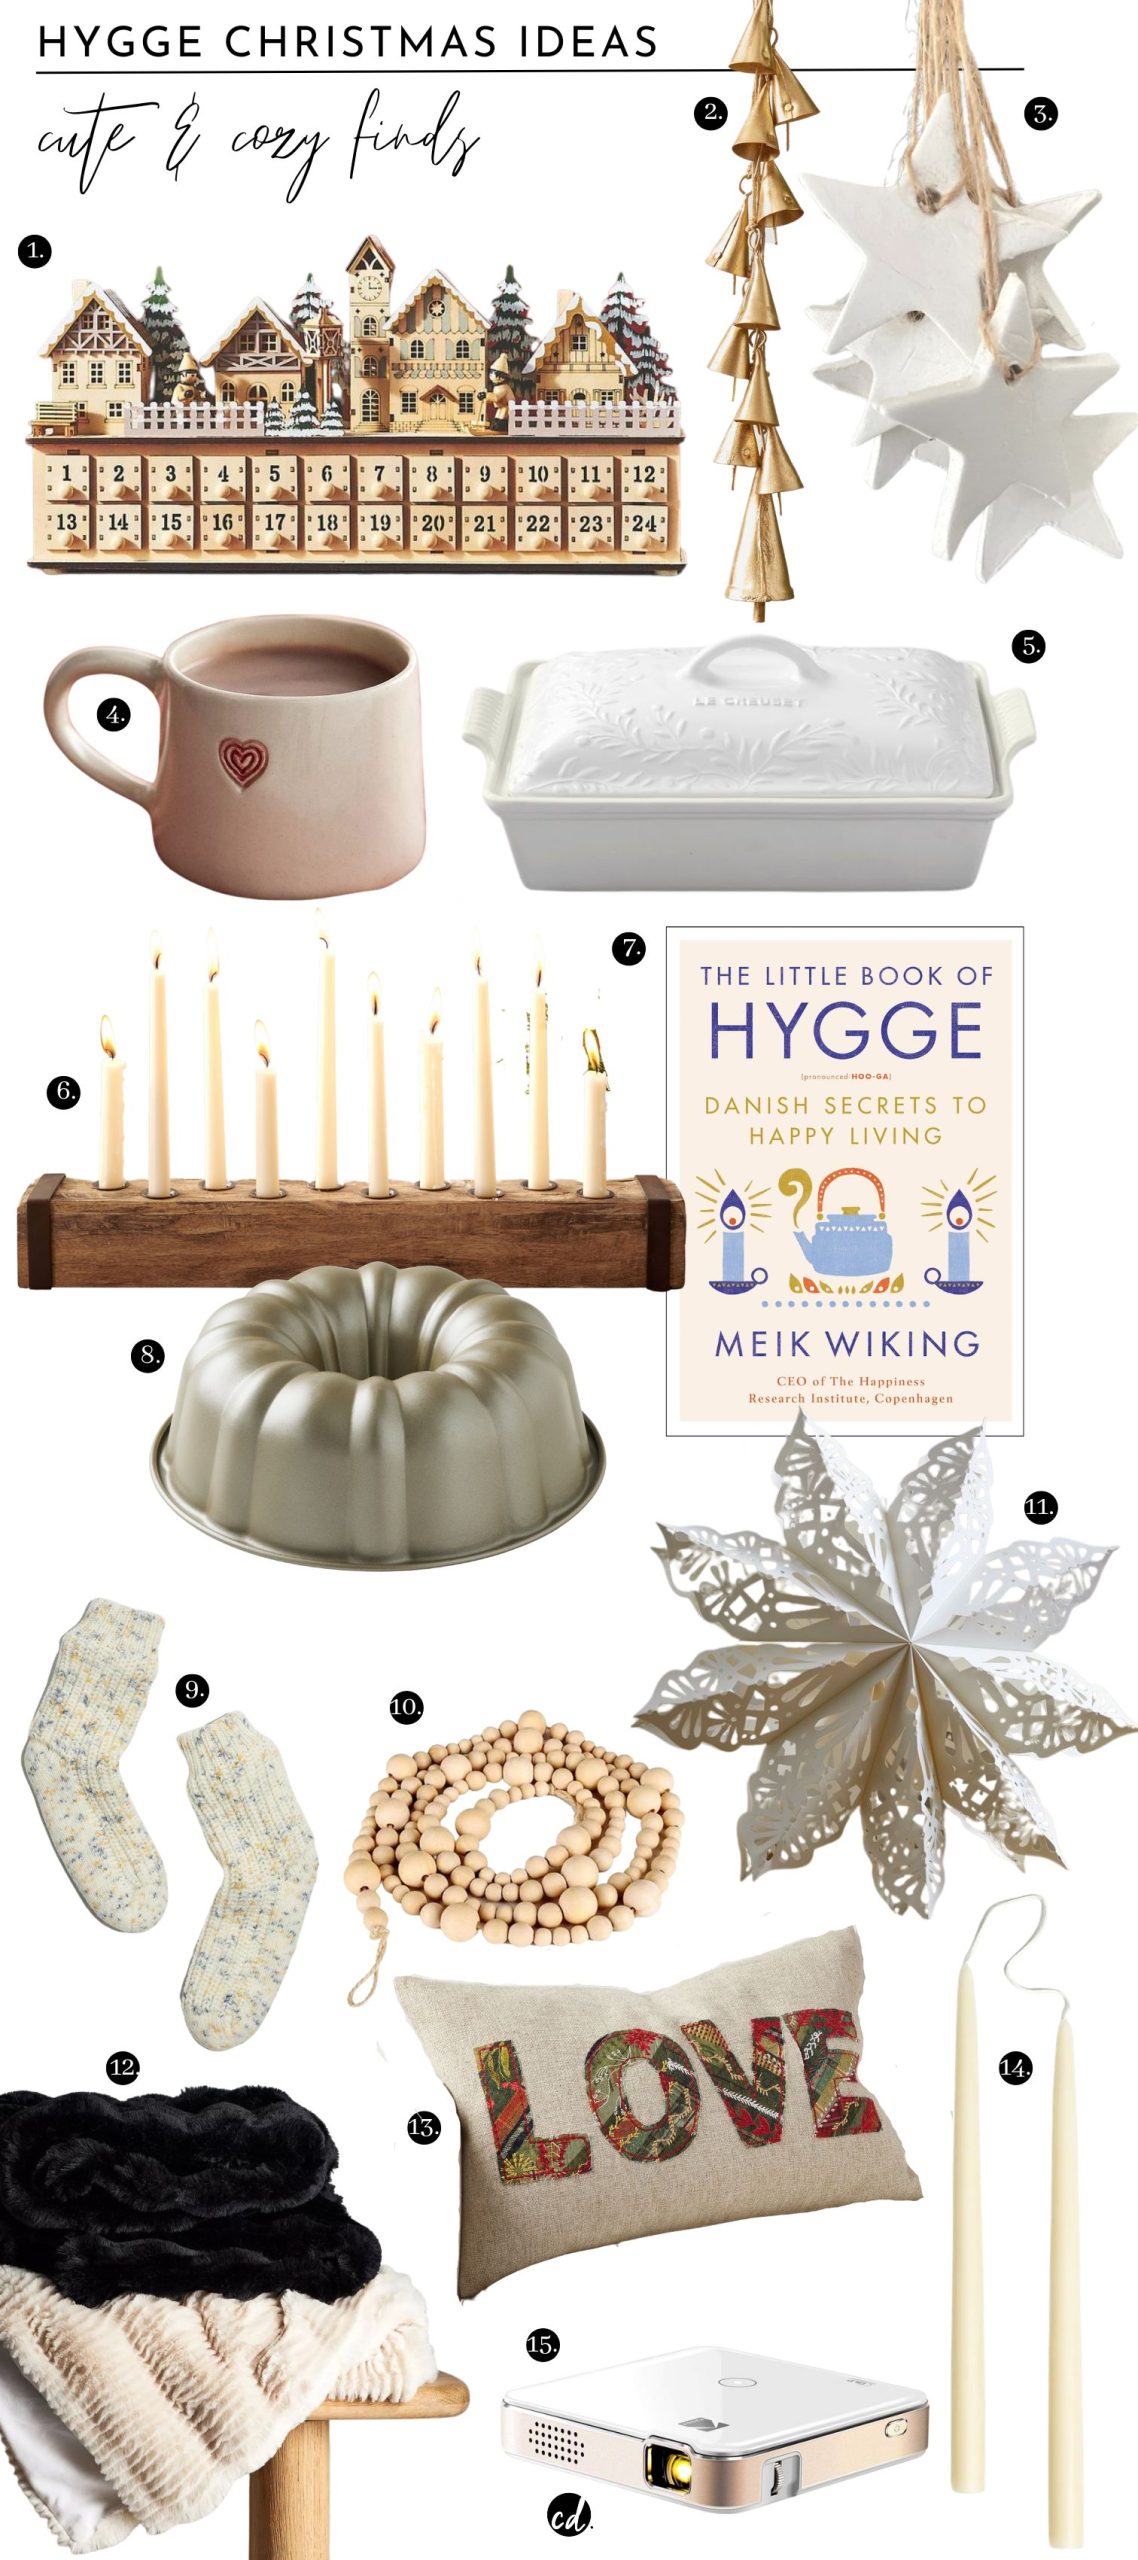 Hygge Christmas Ideas: 

1. Cindy Advent Calendar | 2. Dangling Bells Ornament | 3. White Clay Stars Set | 4. Icon Ceramic Mug | 5. Le Creuset Olive Branch Casserole Dish | 6. Woodbine Taper Piece | 7. The Little Book of Hygge | 8. Fluted Tube Cake | 9. Cozy Knit House Socks | 10. Wood Beads Garland | 11. Large Paper Snowflakes | 12. Aden Faux Fur Throw Blankets | 13. Love Patchwork Lumbar Pillow | 14. Dipped Taper Candles | 15. Kodak Mini Projector